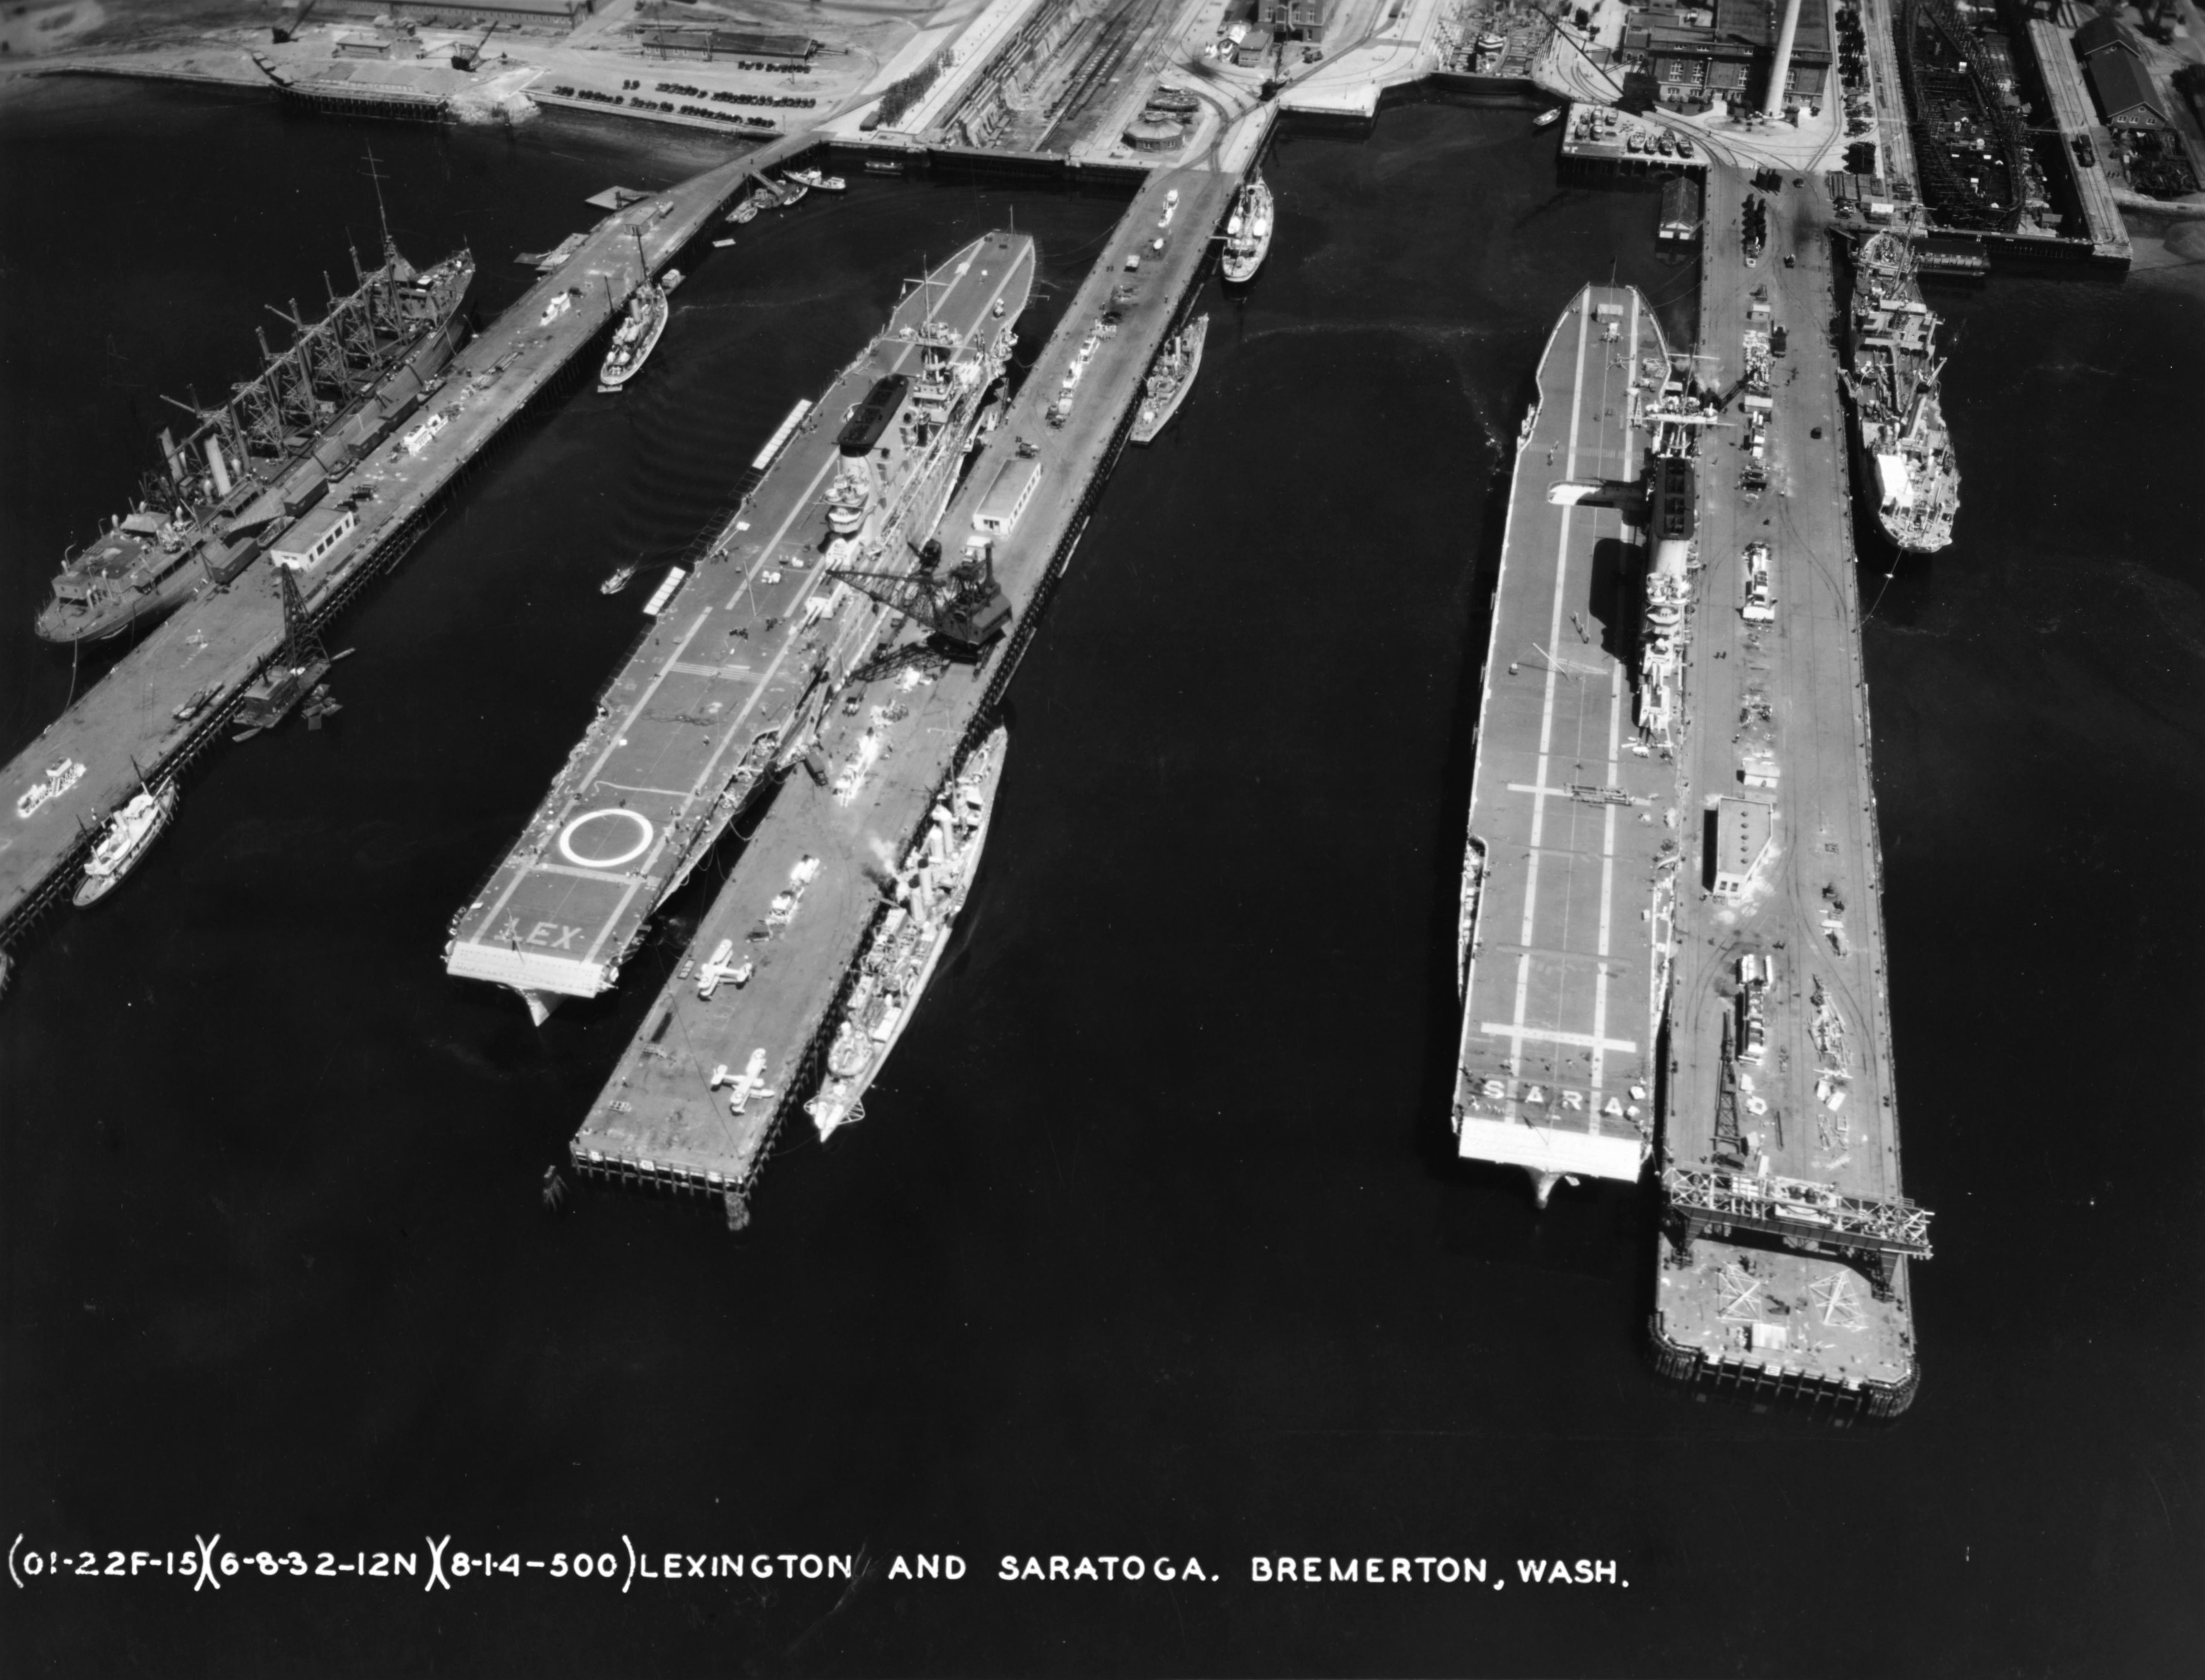 Piers at Puget Sound Navy Yard in Bremerton, Washington, United States with, left to right, repair ship (converted collier) Jason, and carriers Lexington (Lexington-class), Saratoga, 6 Aug 1932.